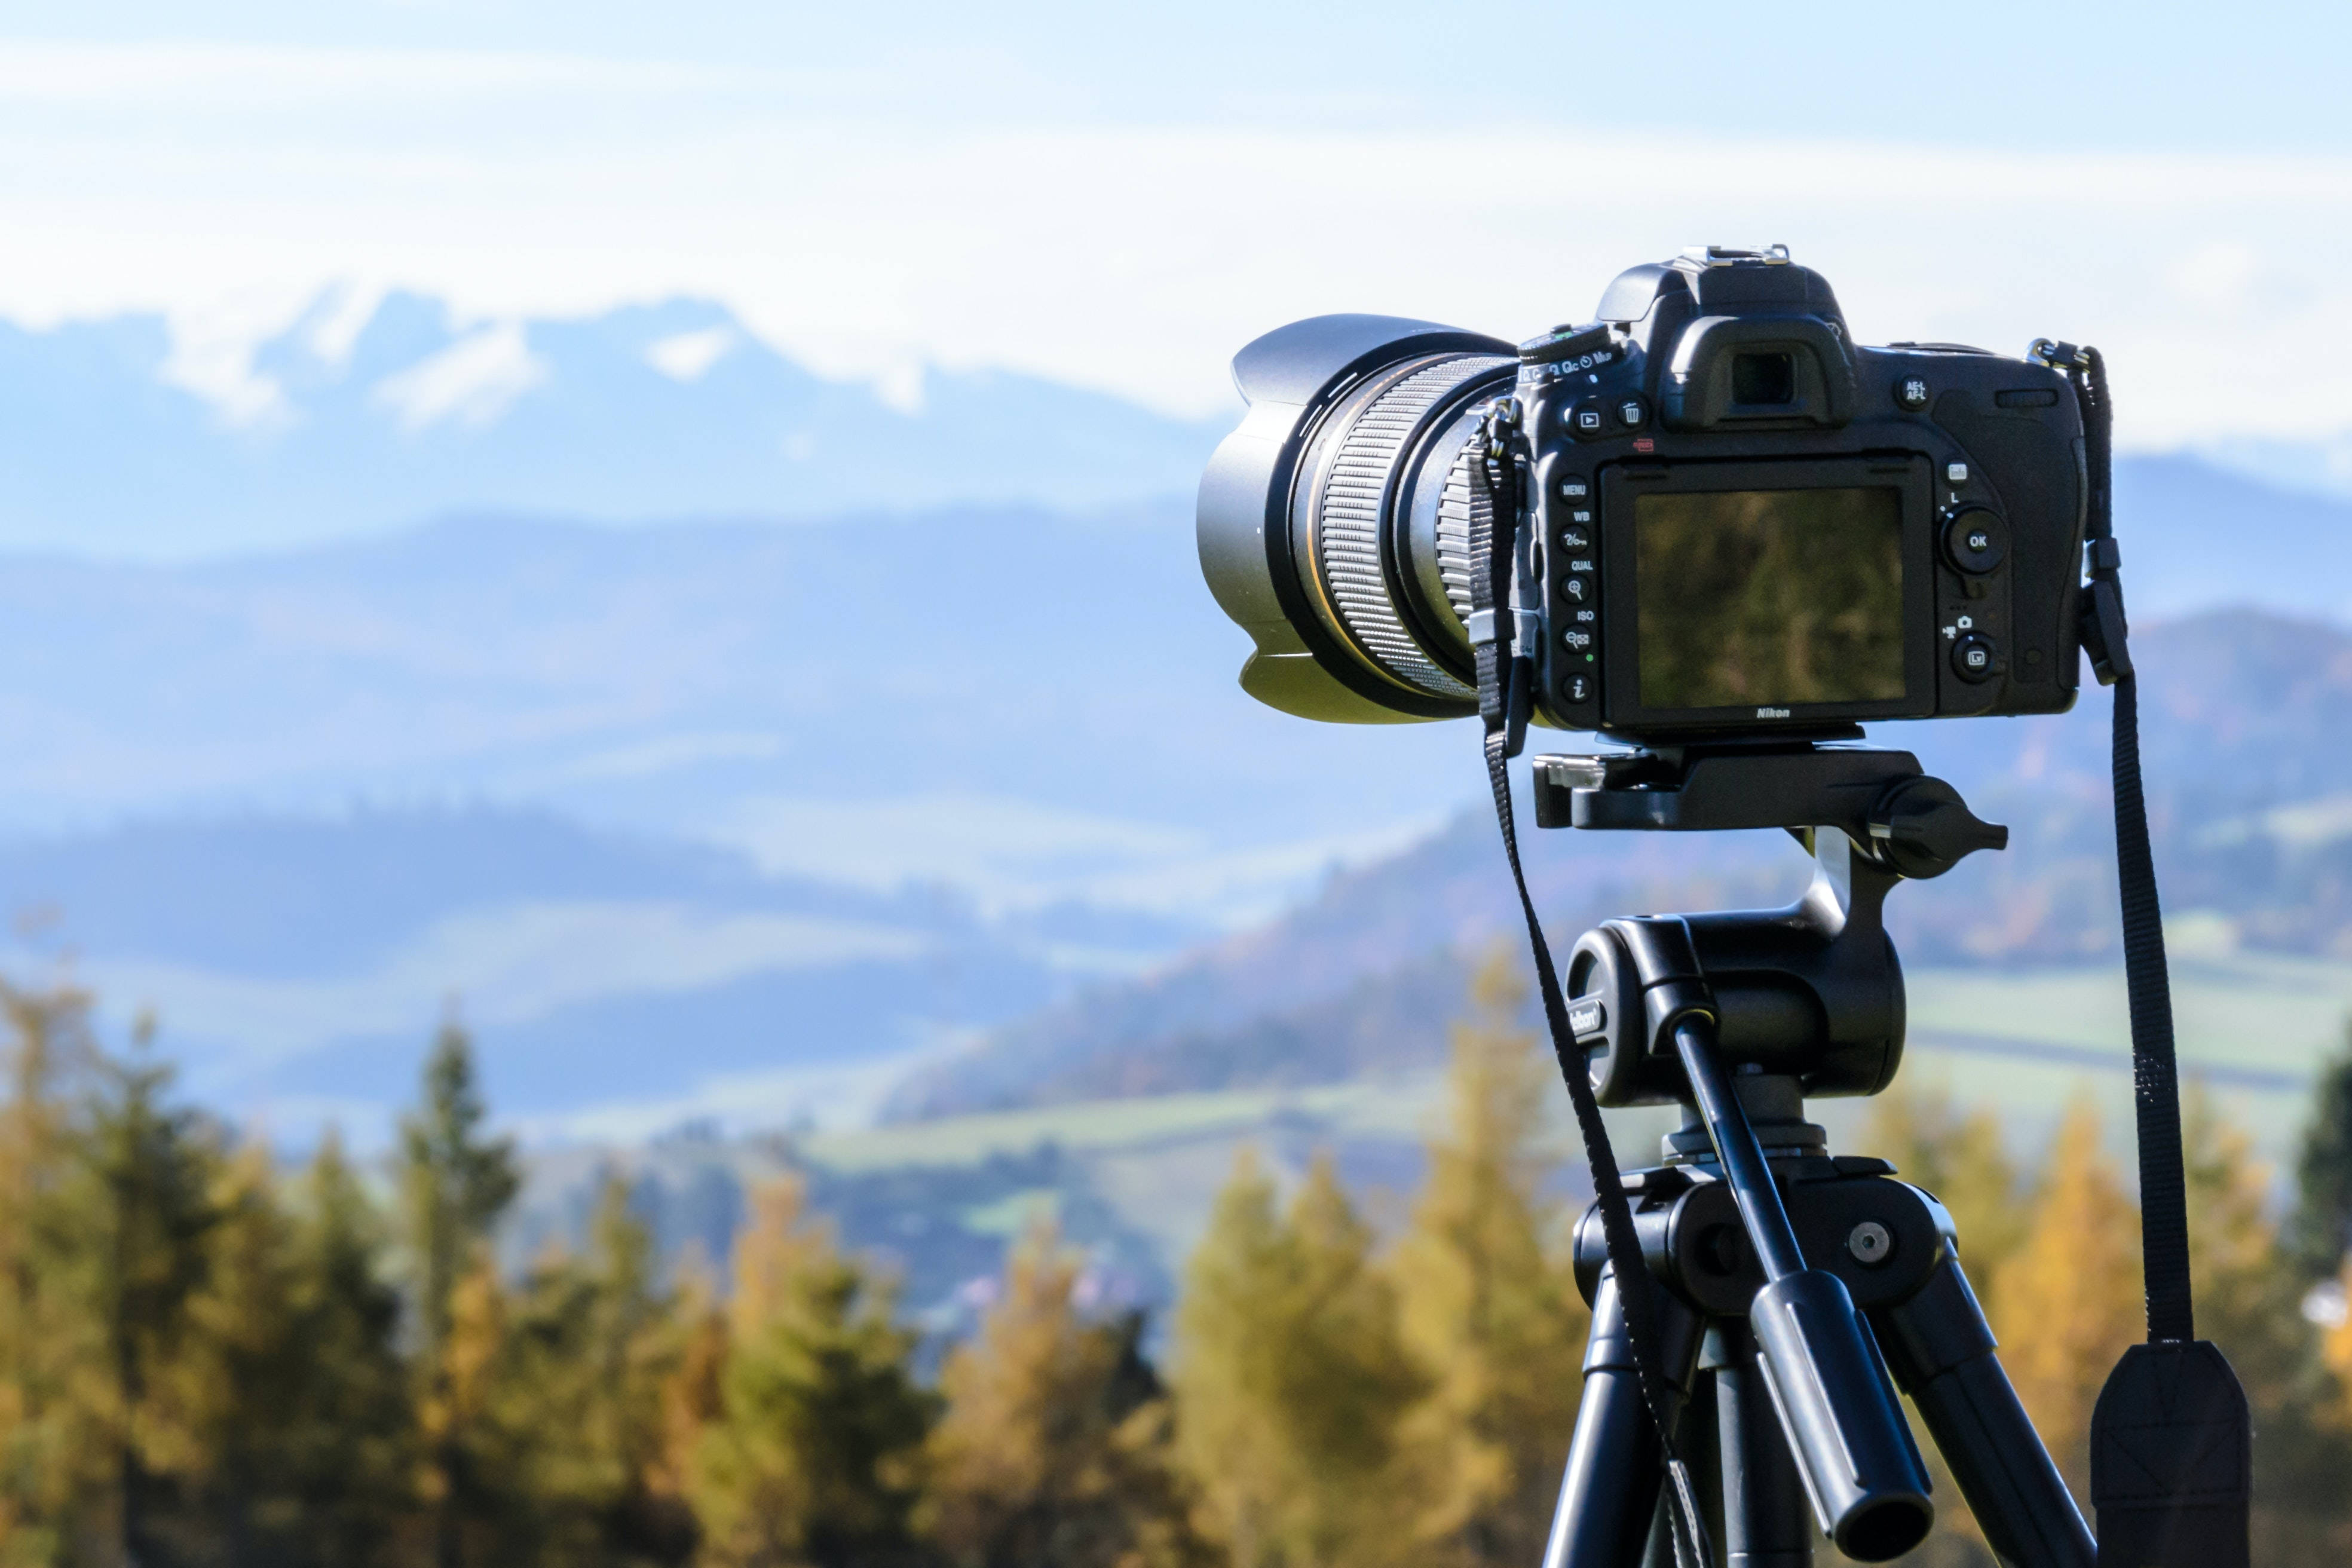 340 Camera HD Wallpapers and Backgrounds